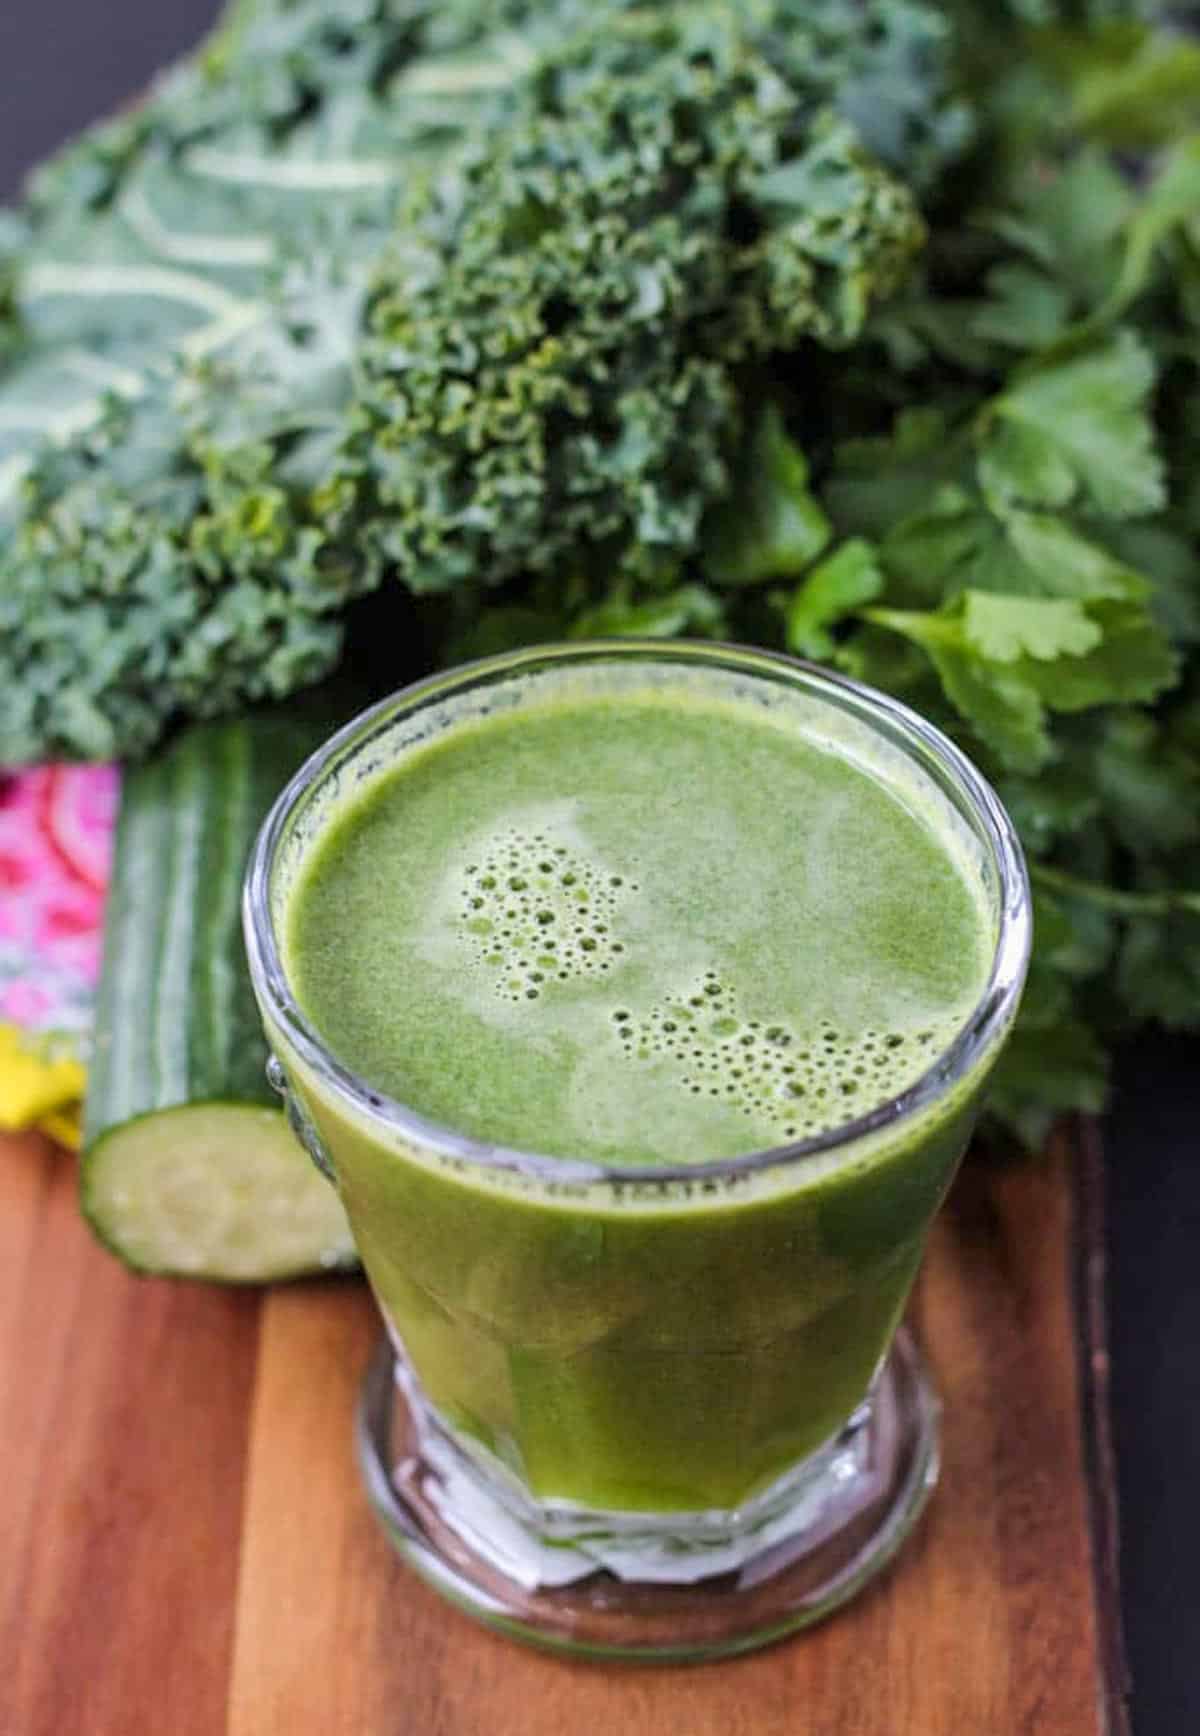 Glass of green juice surrounded by fresh produce.